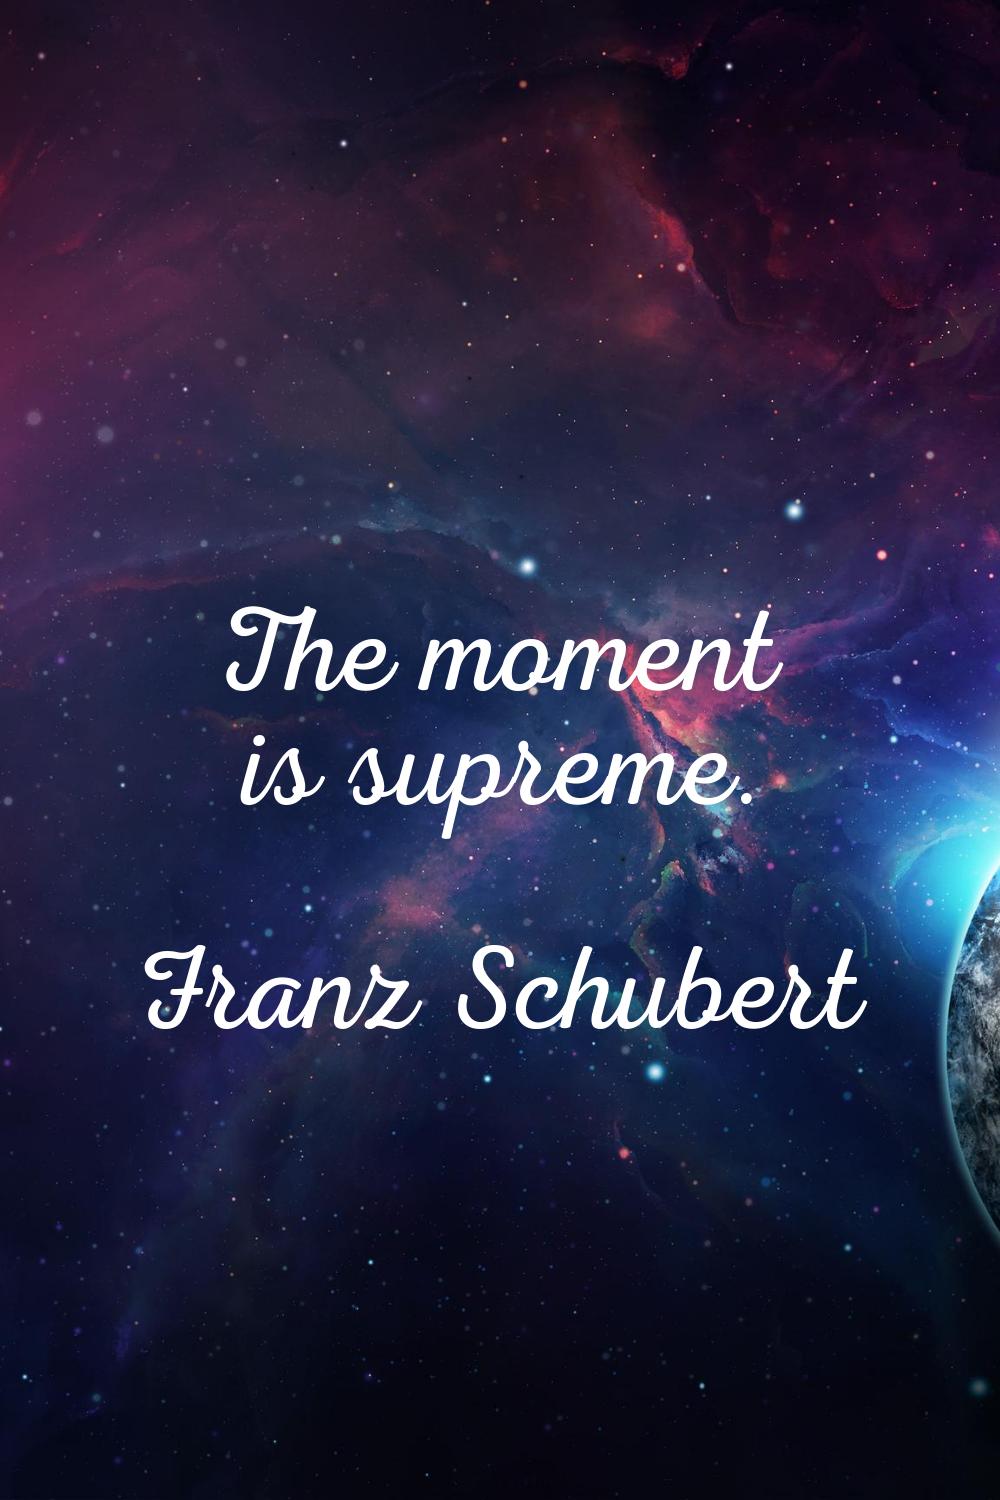 The moment is supreme.